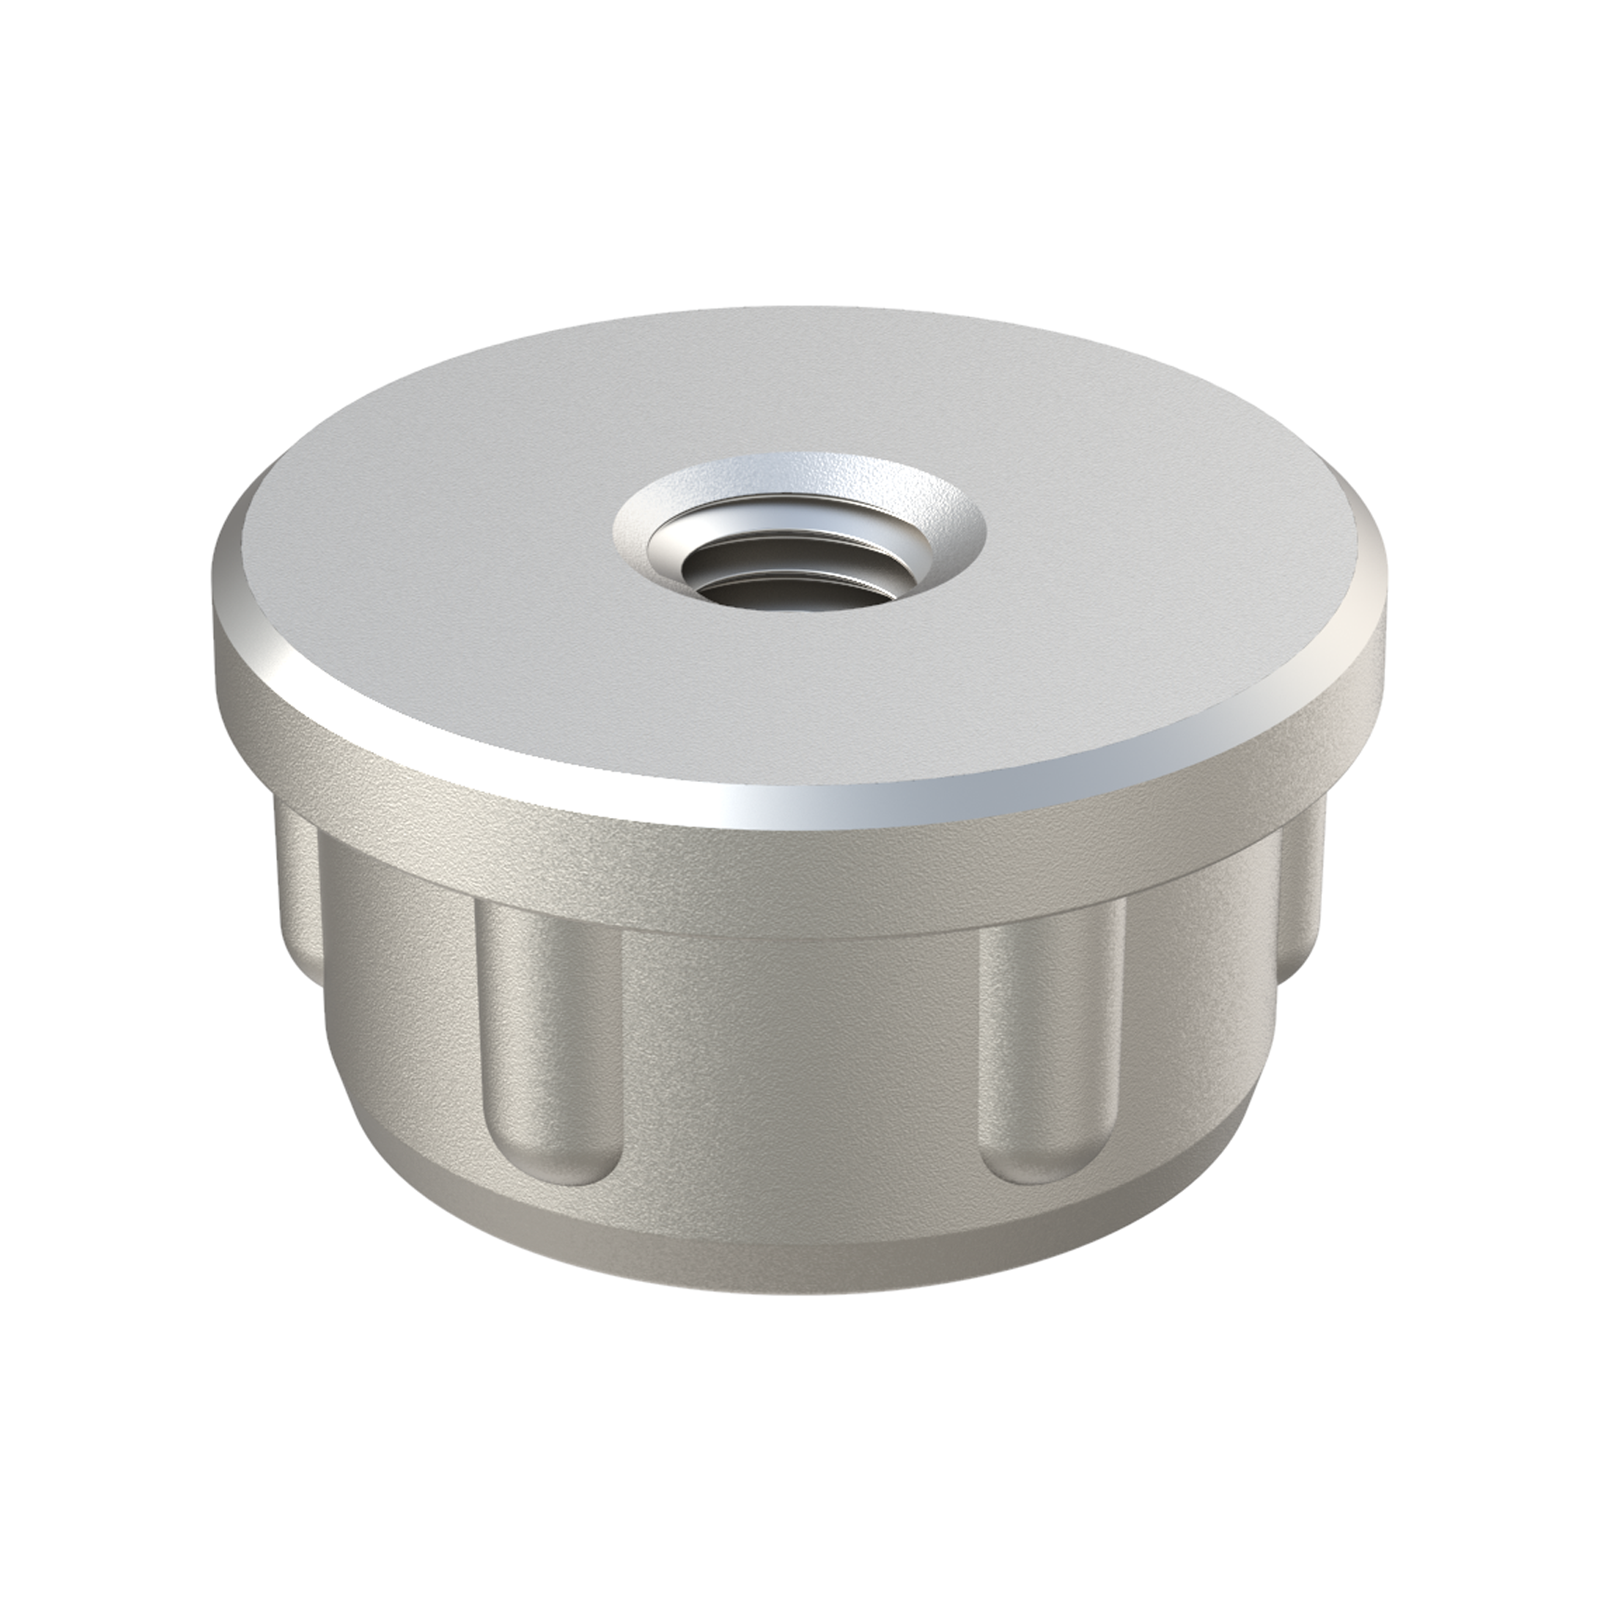 Our threaded insert is manufactured in a Zamak alloy for round tubes. It is also available for square tubes: LJM, for rectangular tubes: LJMZ, and for oval tubes: LJMO. Our finishing parts LRR can be used for the inserts designed for 60 mm tubes.